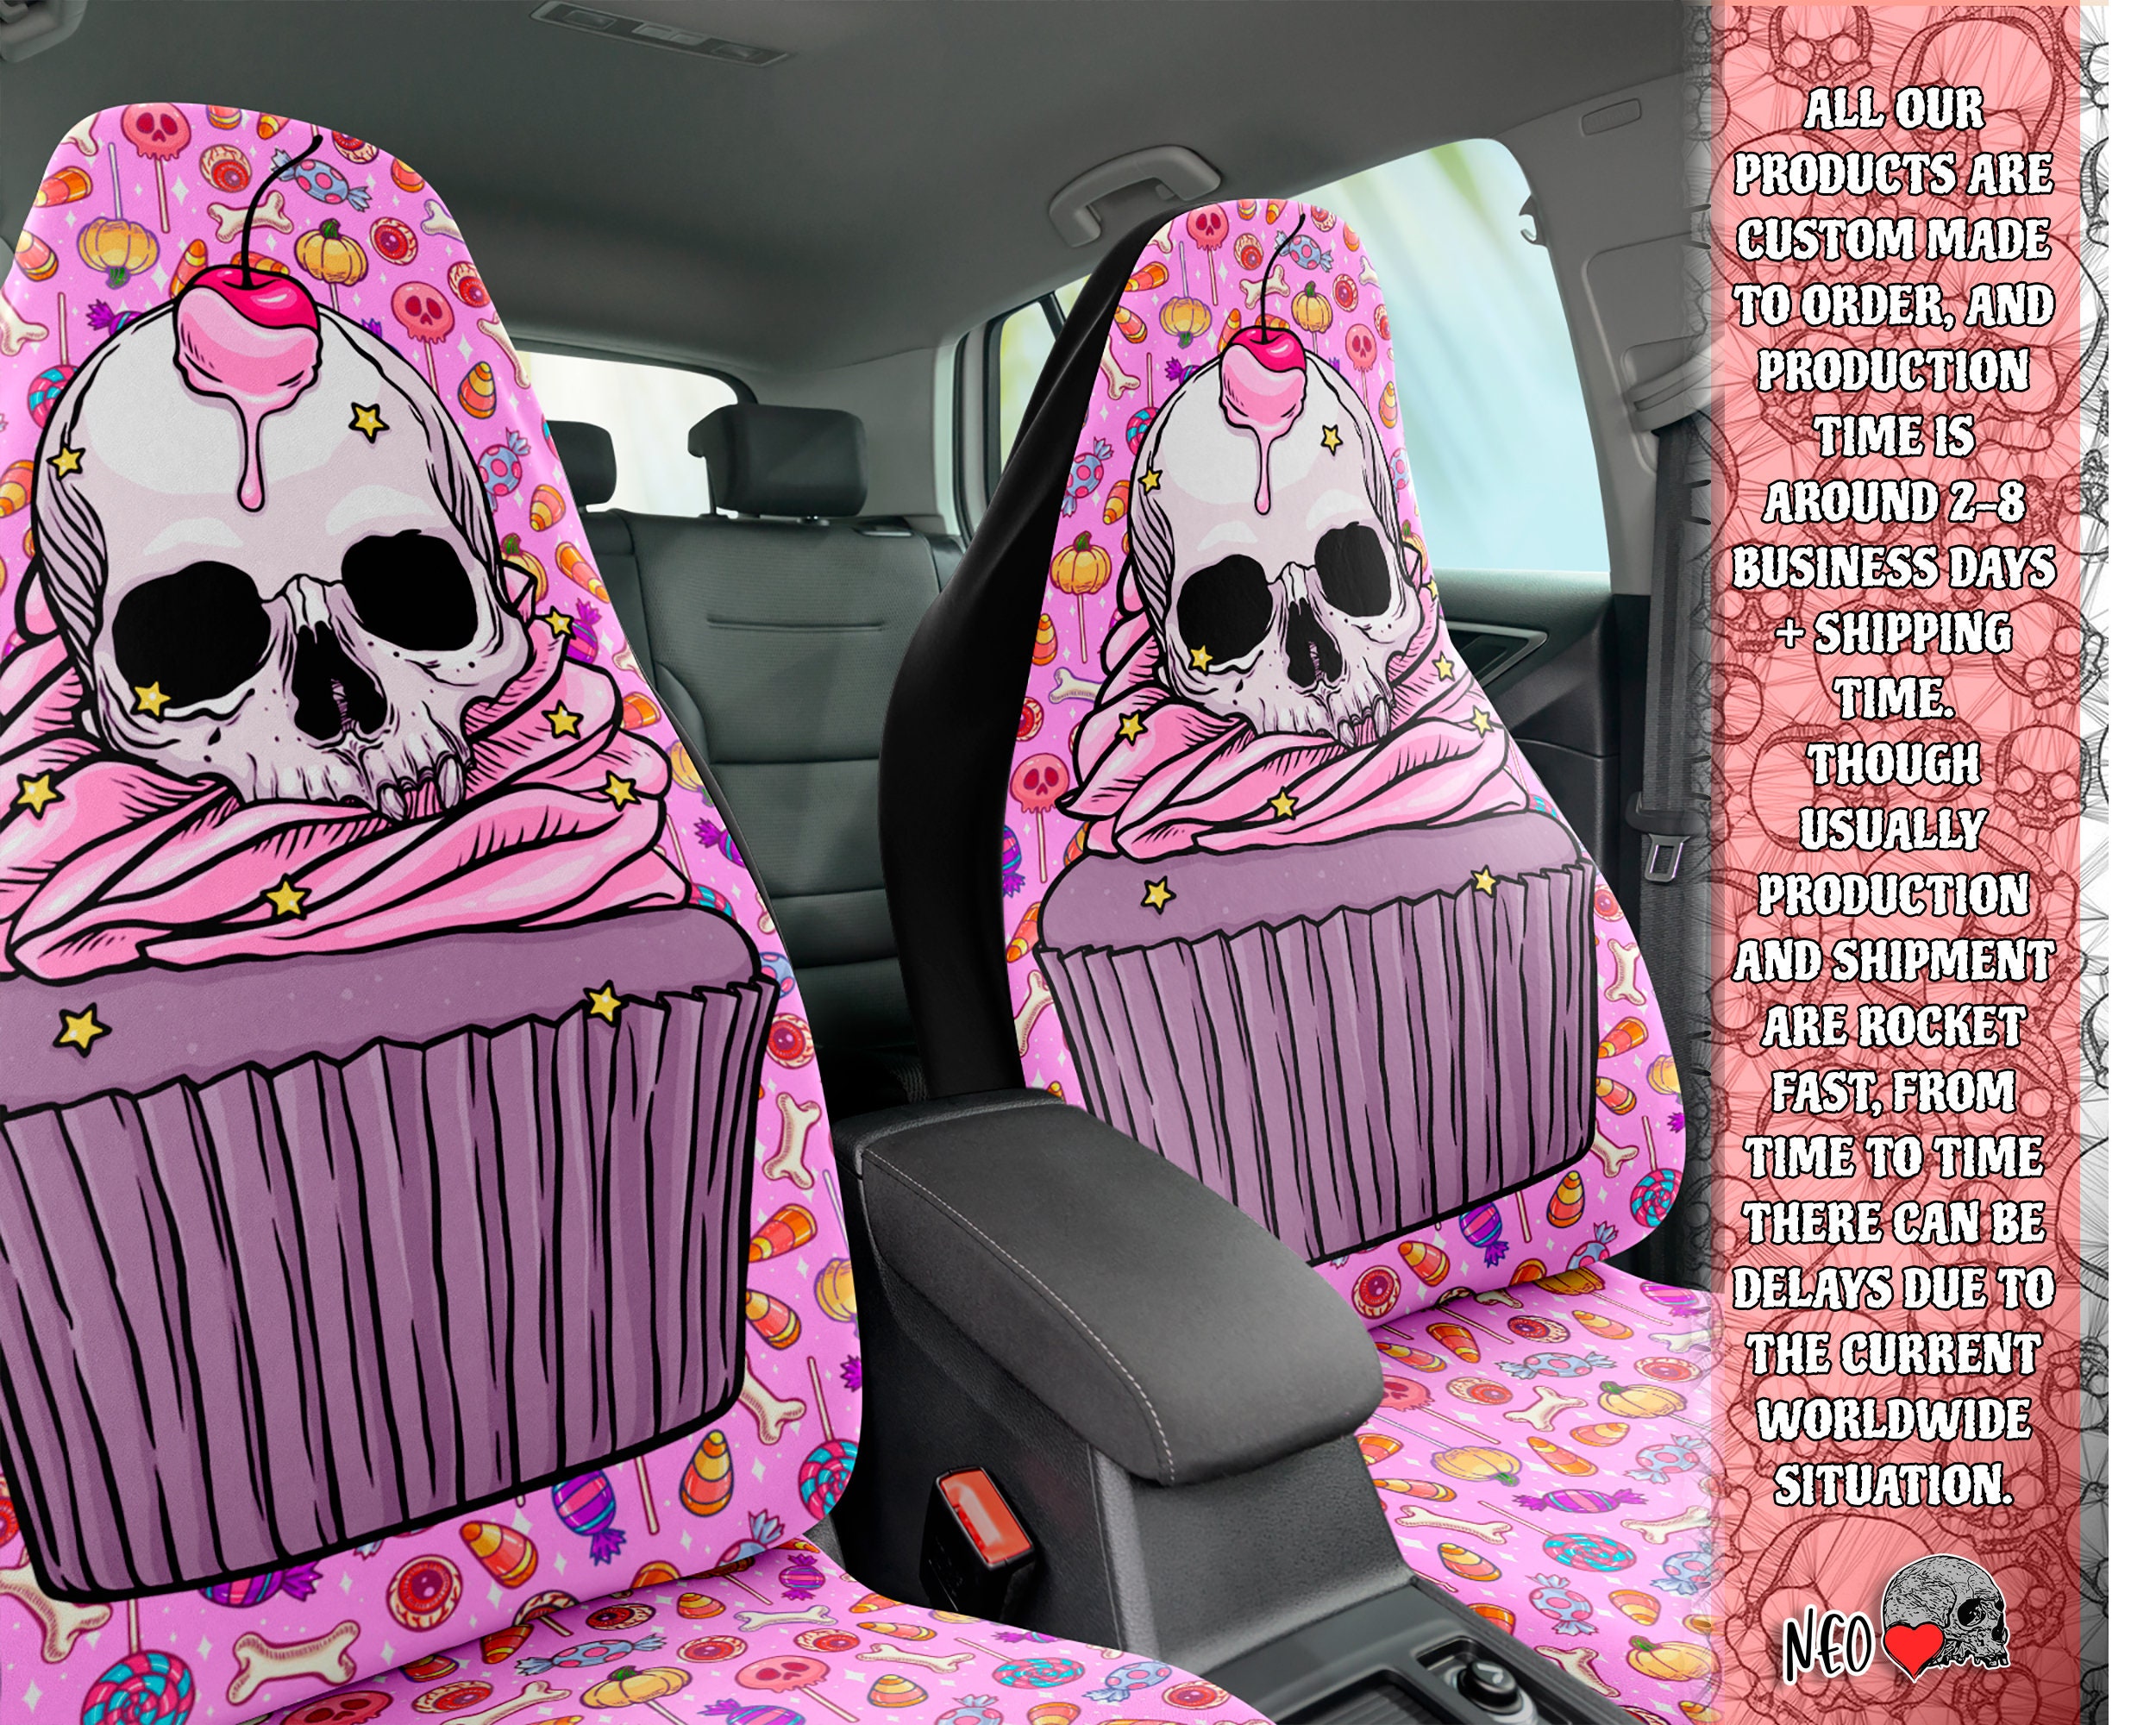 Pastel Goth Car Accessories, Sad Cookie Car Seat Covers, Halloween Wicked Car  Accessories, Edgy Girl Goth Car Accessory 